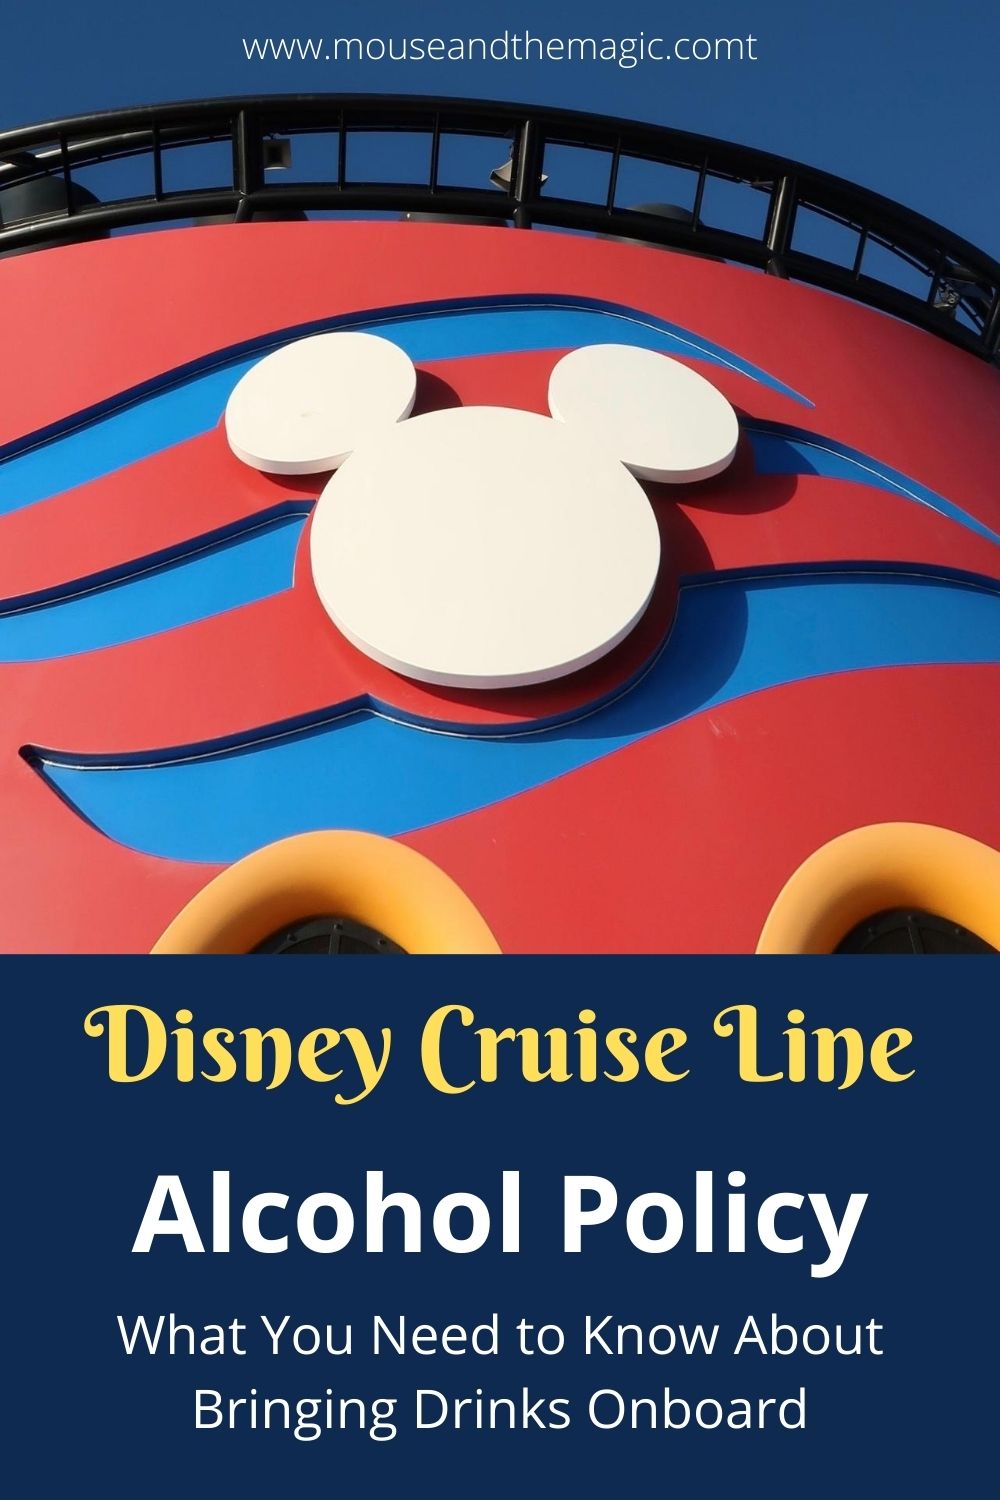 Disney Cruise Line Alcohol Policy - What You Need to Know About Bringing Drinks Onboard